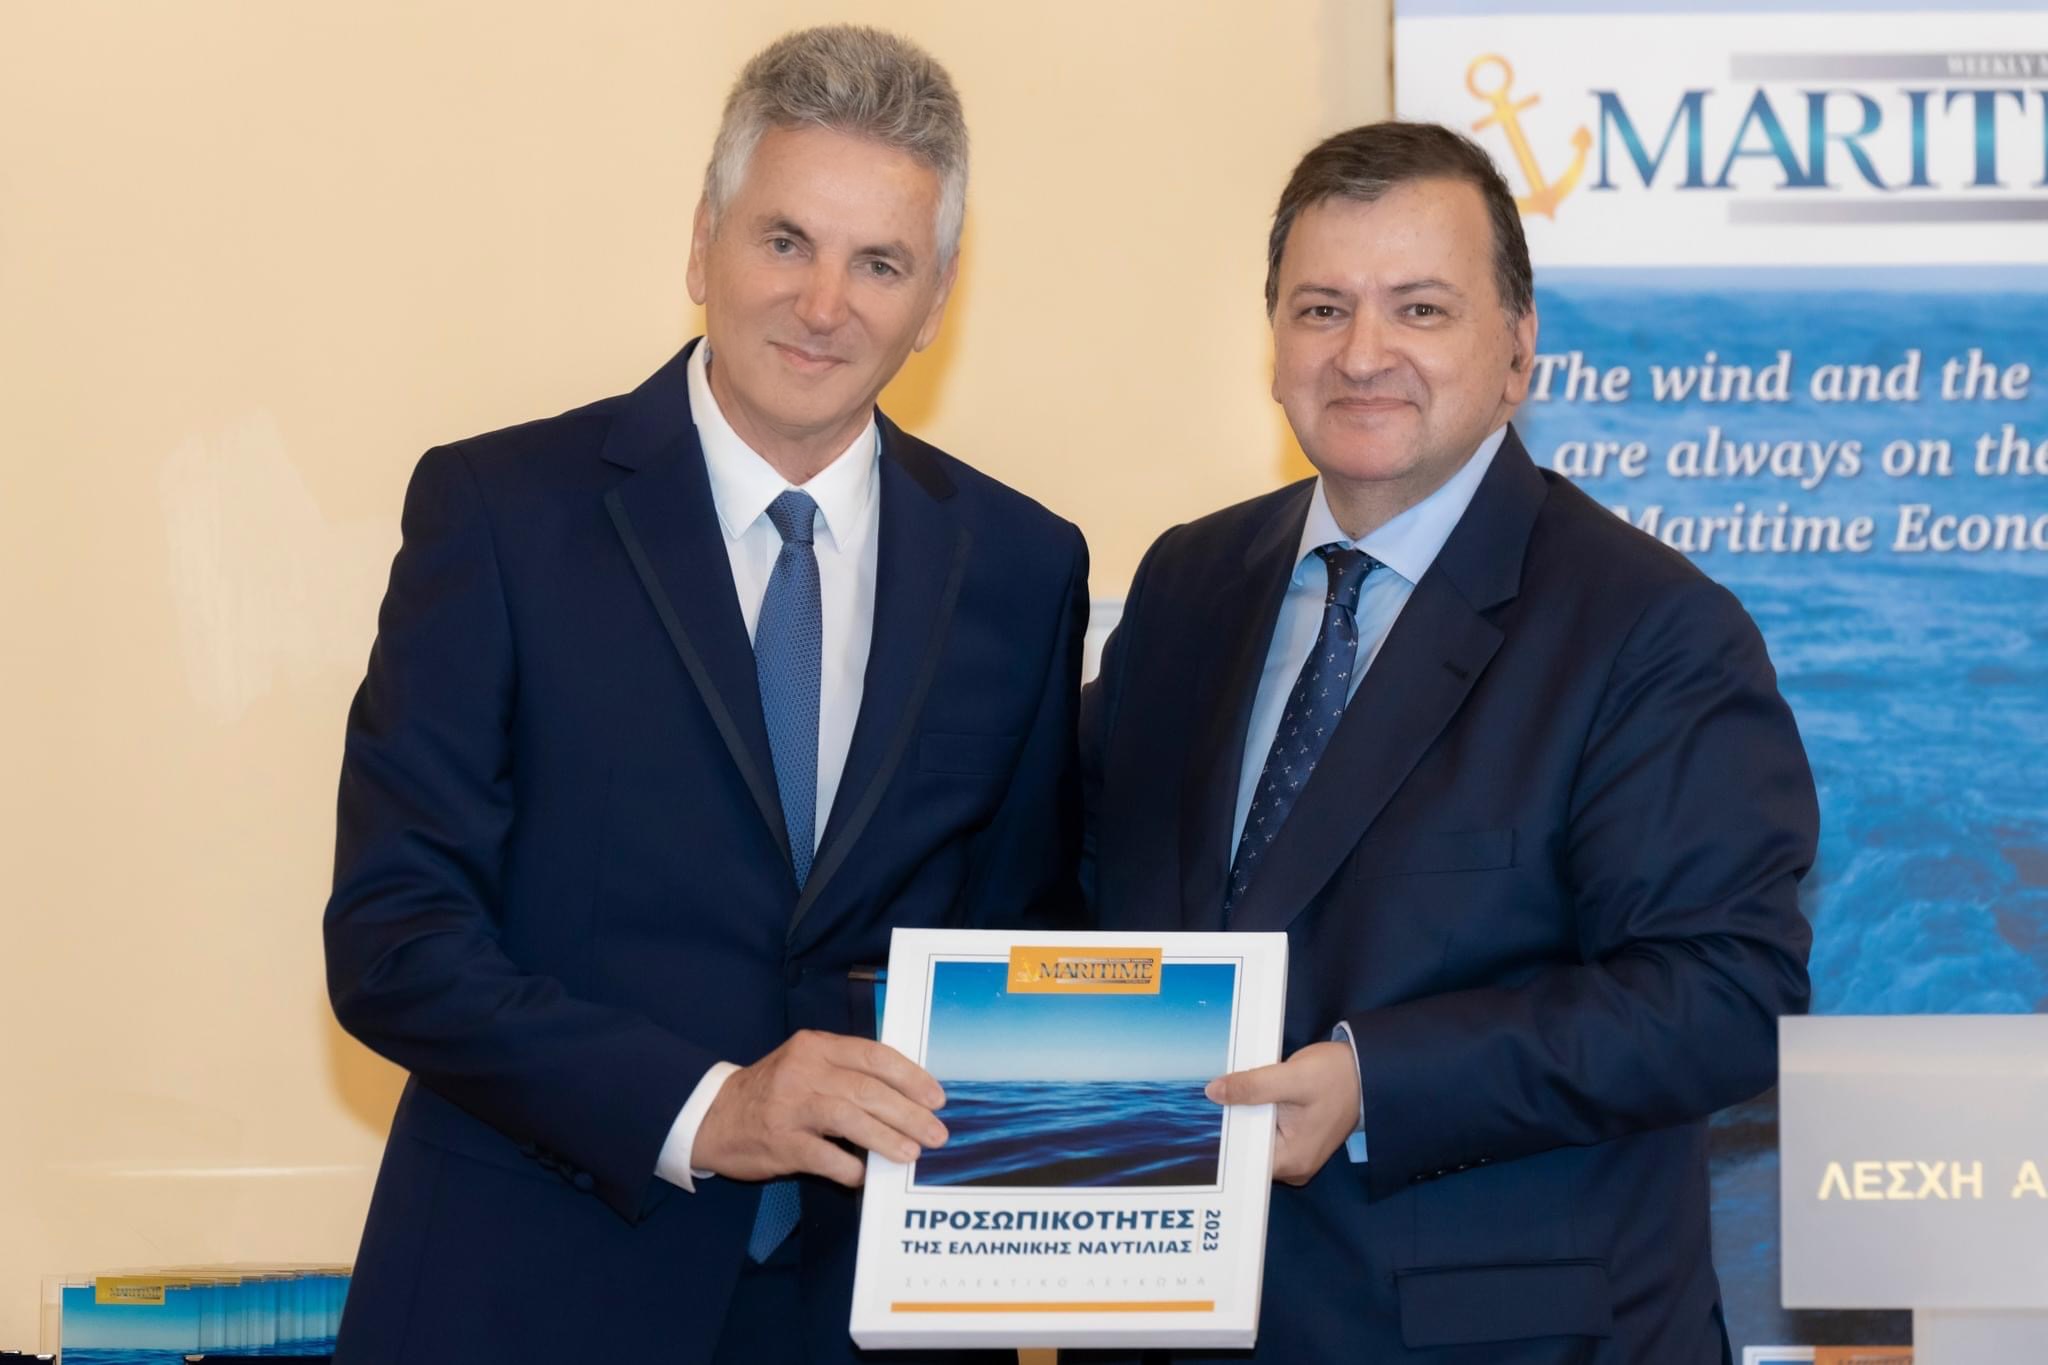 You are currently viewing GREEK SHIPPING PERSONALITIES 2023 – HONORARY AWARD to Capt Mattheou Dimitrios , CEO of Arcadia Shipmanagement & Aegean Bulk.